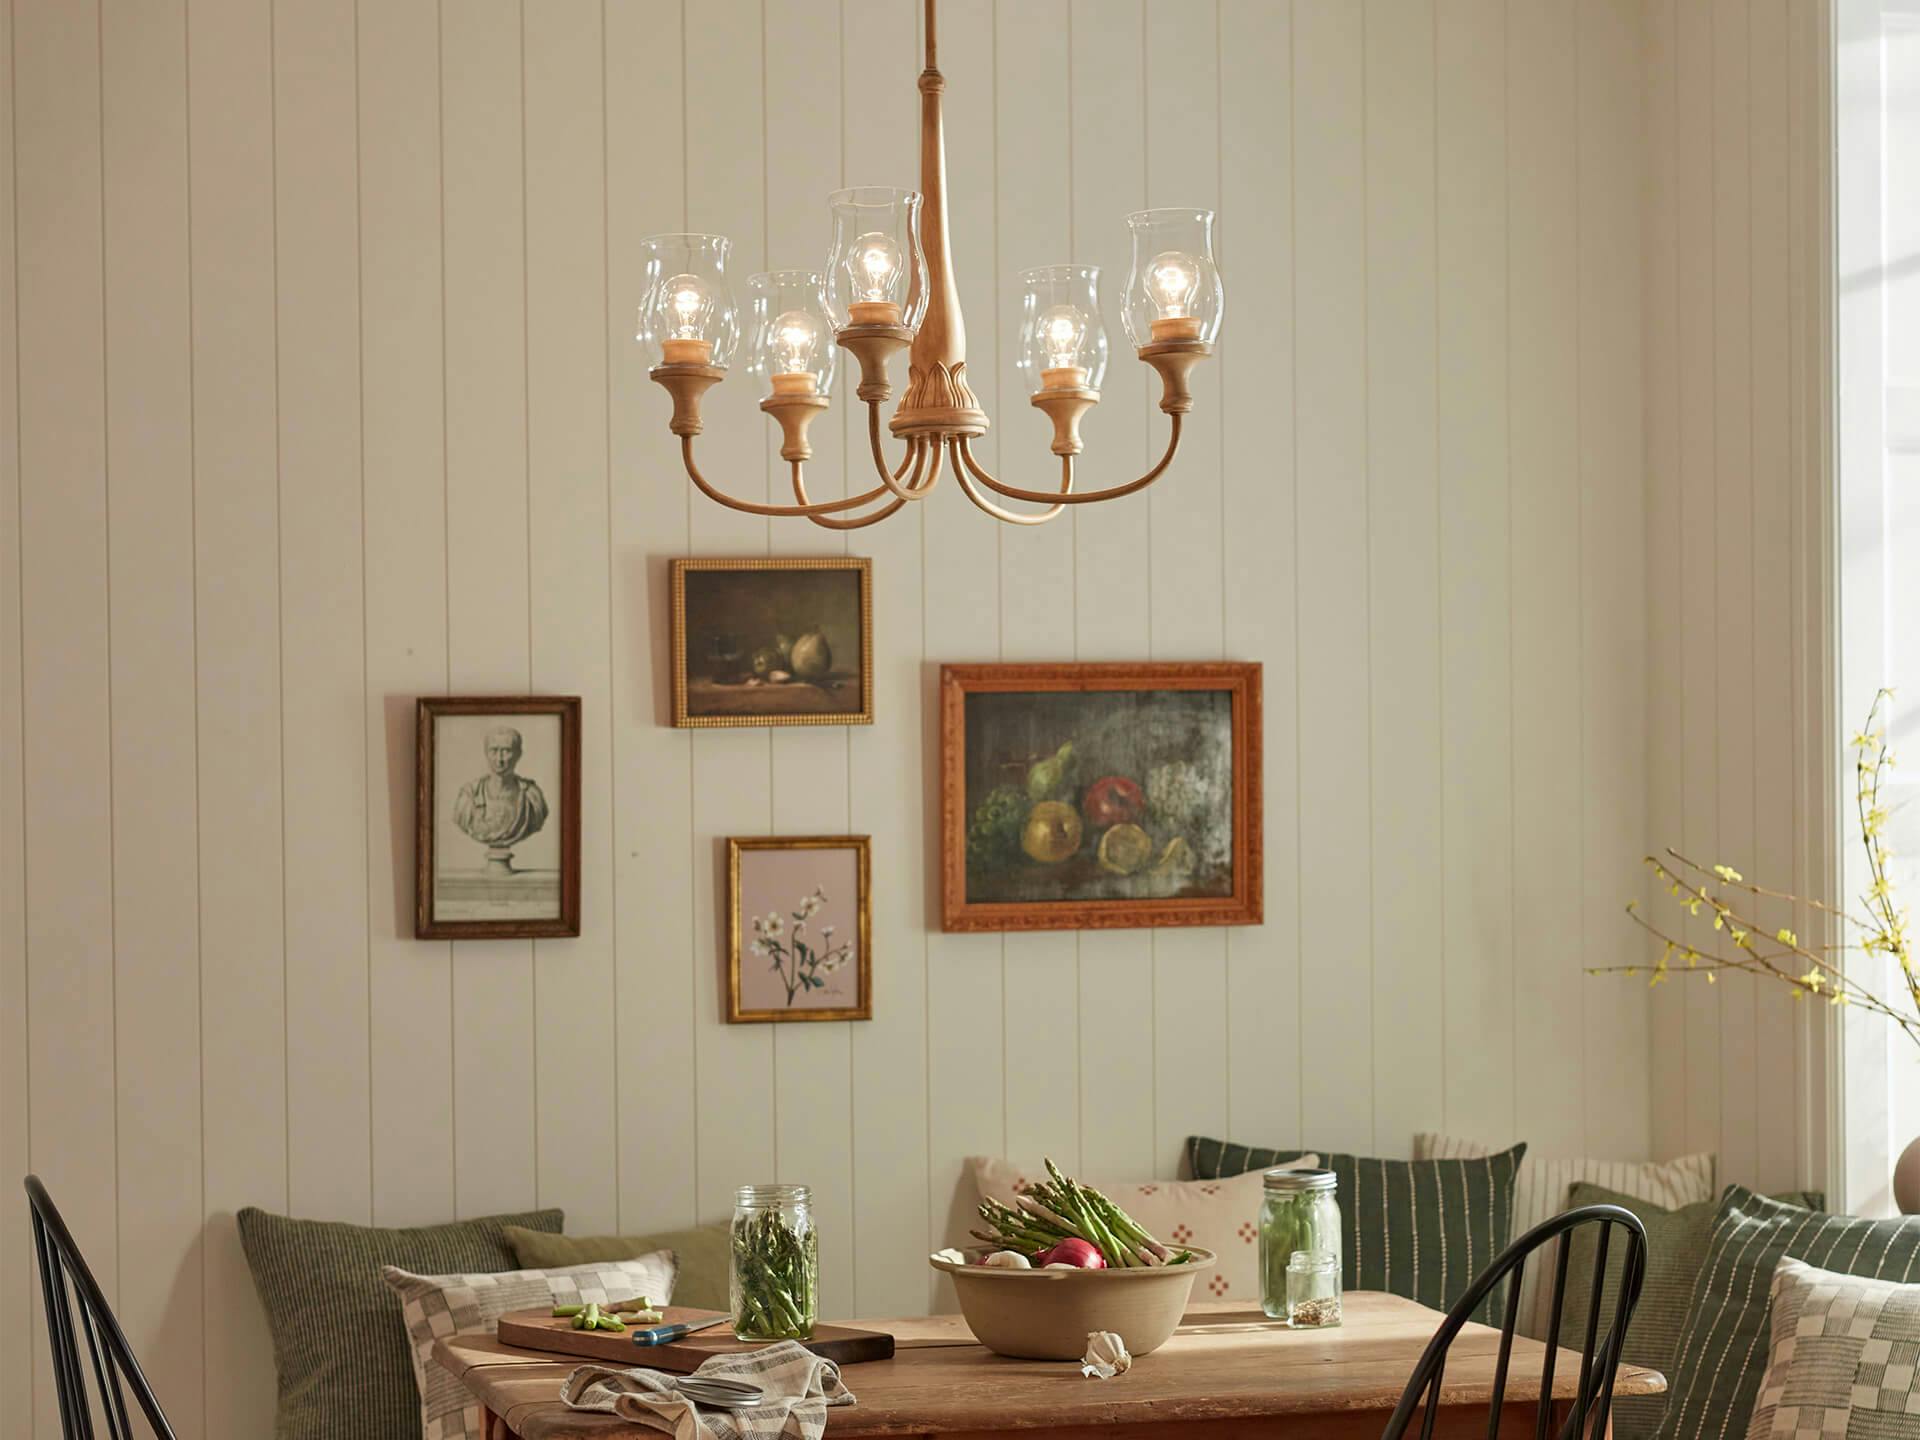 6 light Melis chandelier above a dinning room table in the day turned on